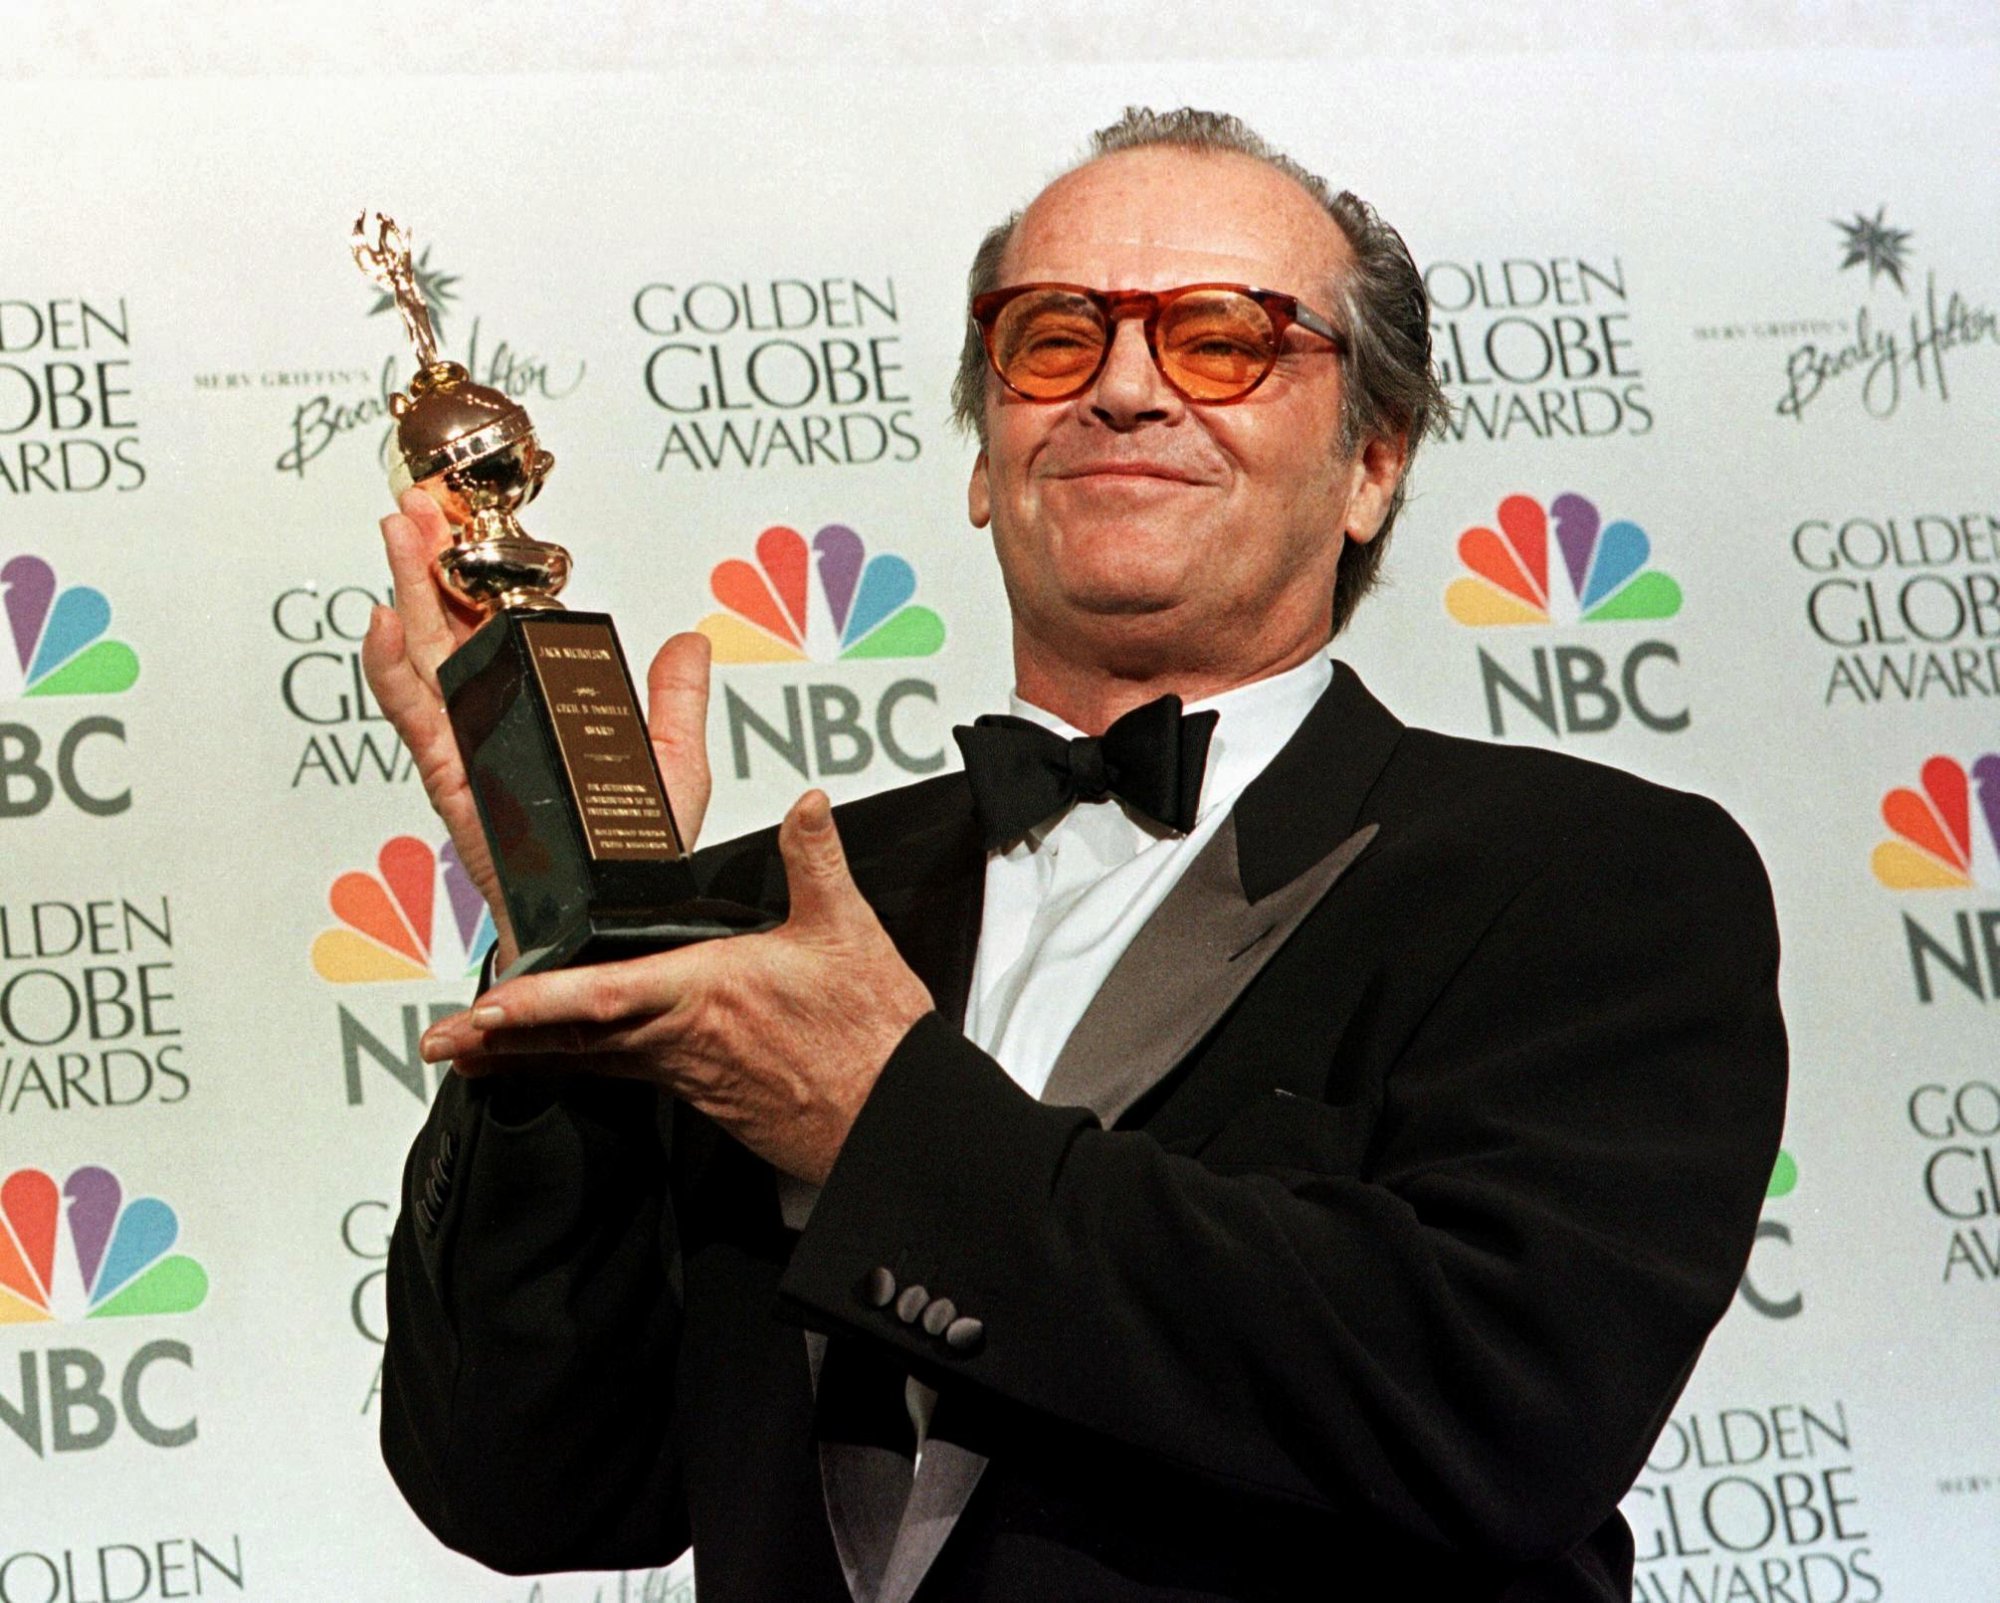 Jack Nicholson with his Cecil B. DeMille Award at the Golden Globes after talking about the New York Yankees in speech in a tuxedo in front of a step and repeat